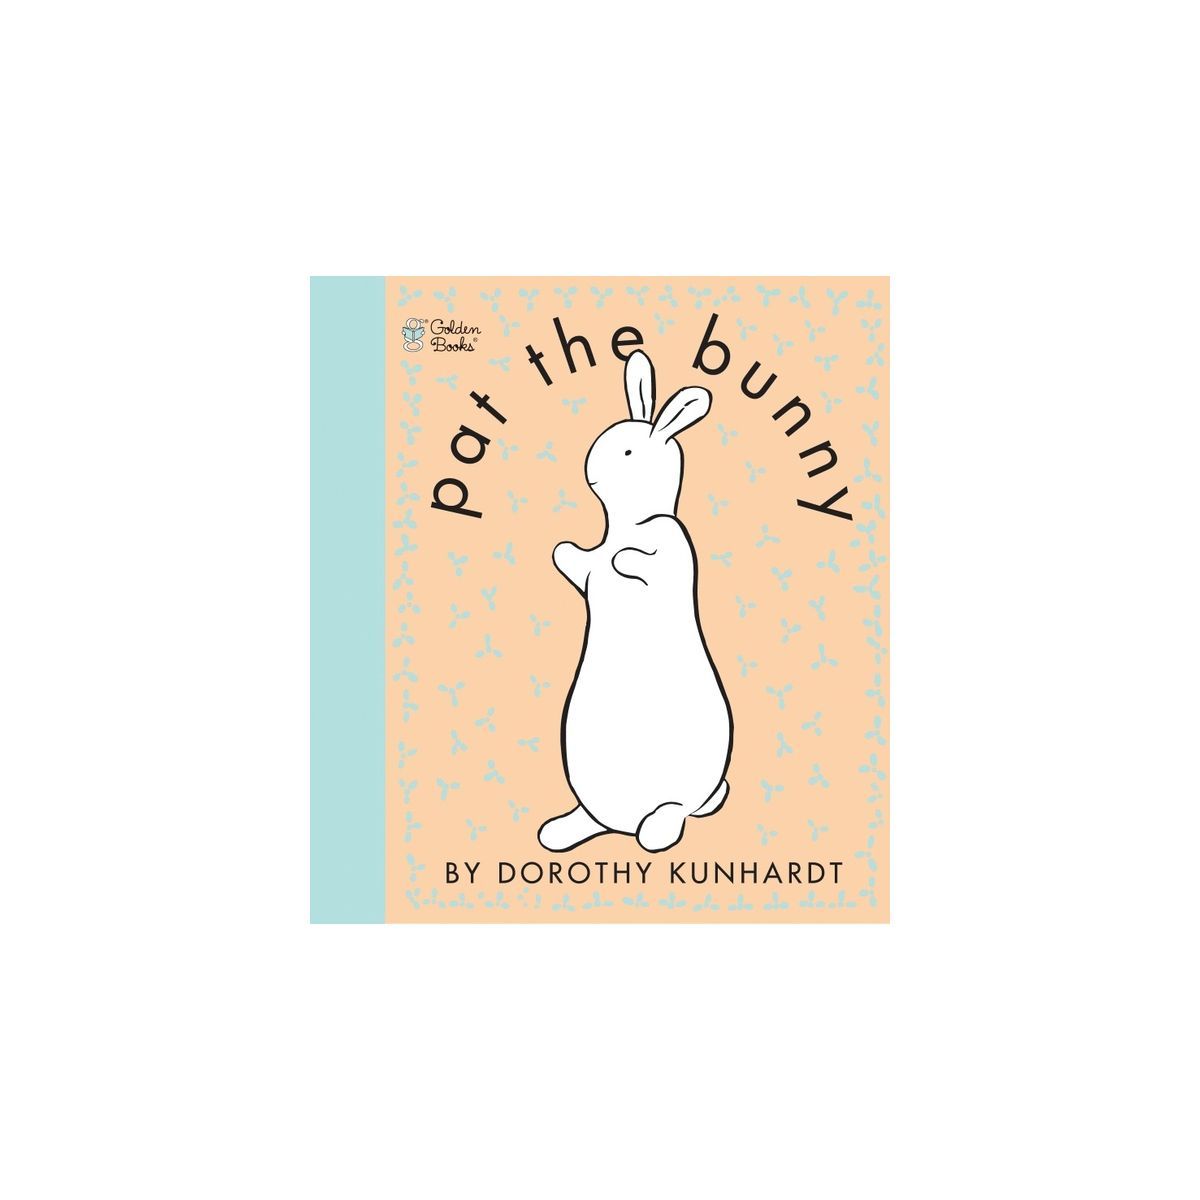 Pat the Bunny (Touch and Feel Book) (Reissue) (Paperback) by Dorothy Meserve Kunhardt | Target